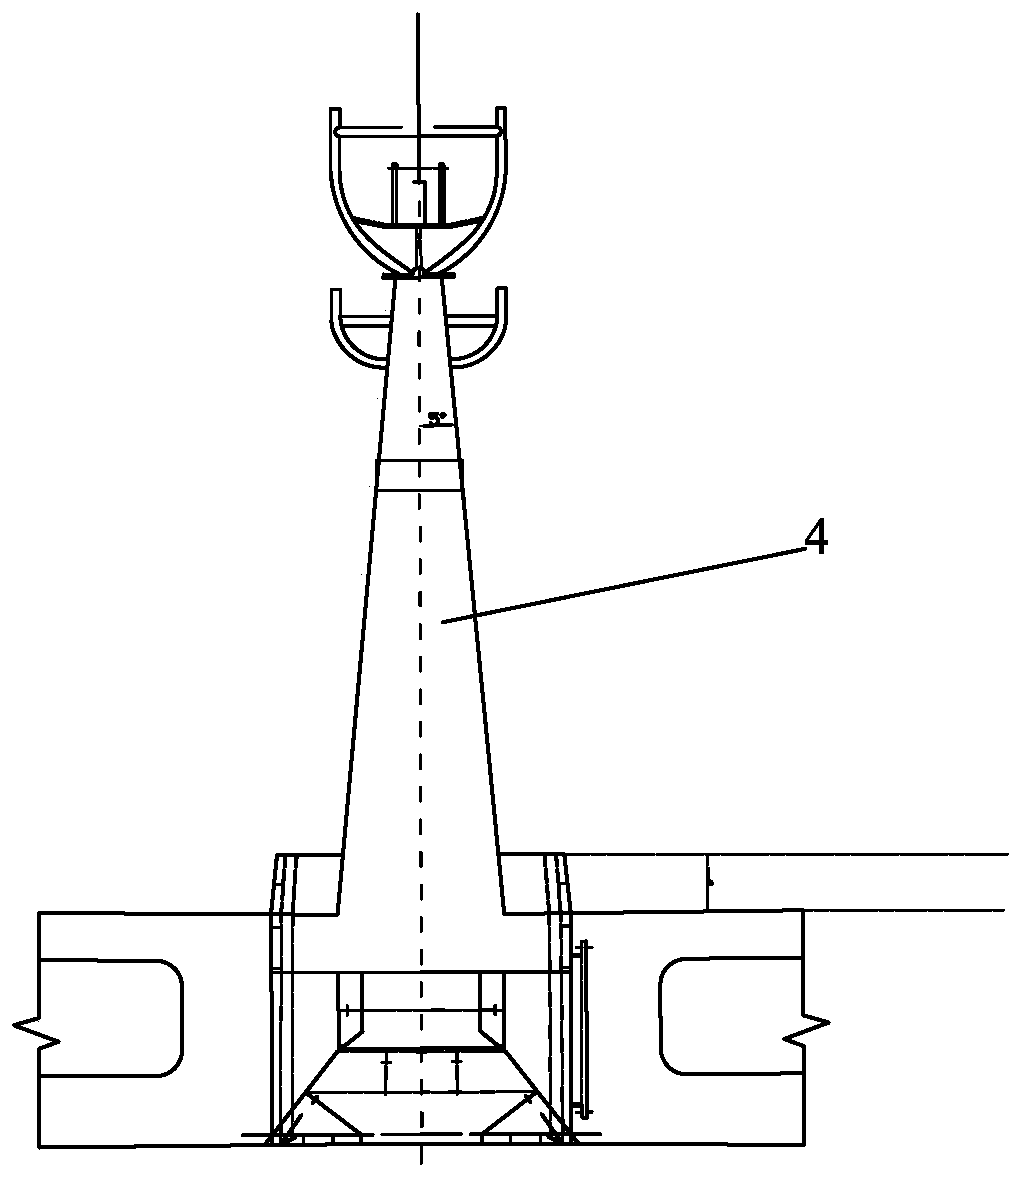 A low-drag mast for a high-speed planing boat